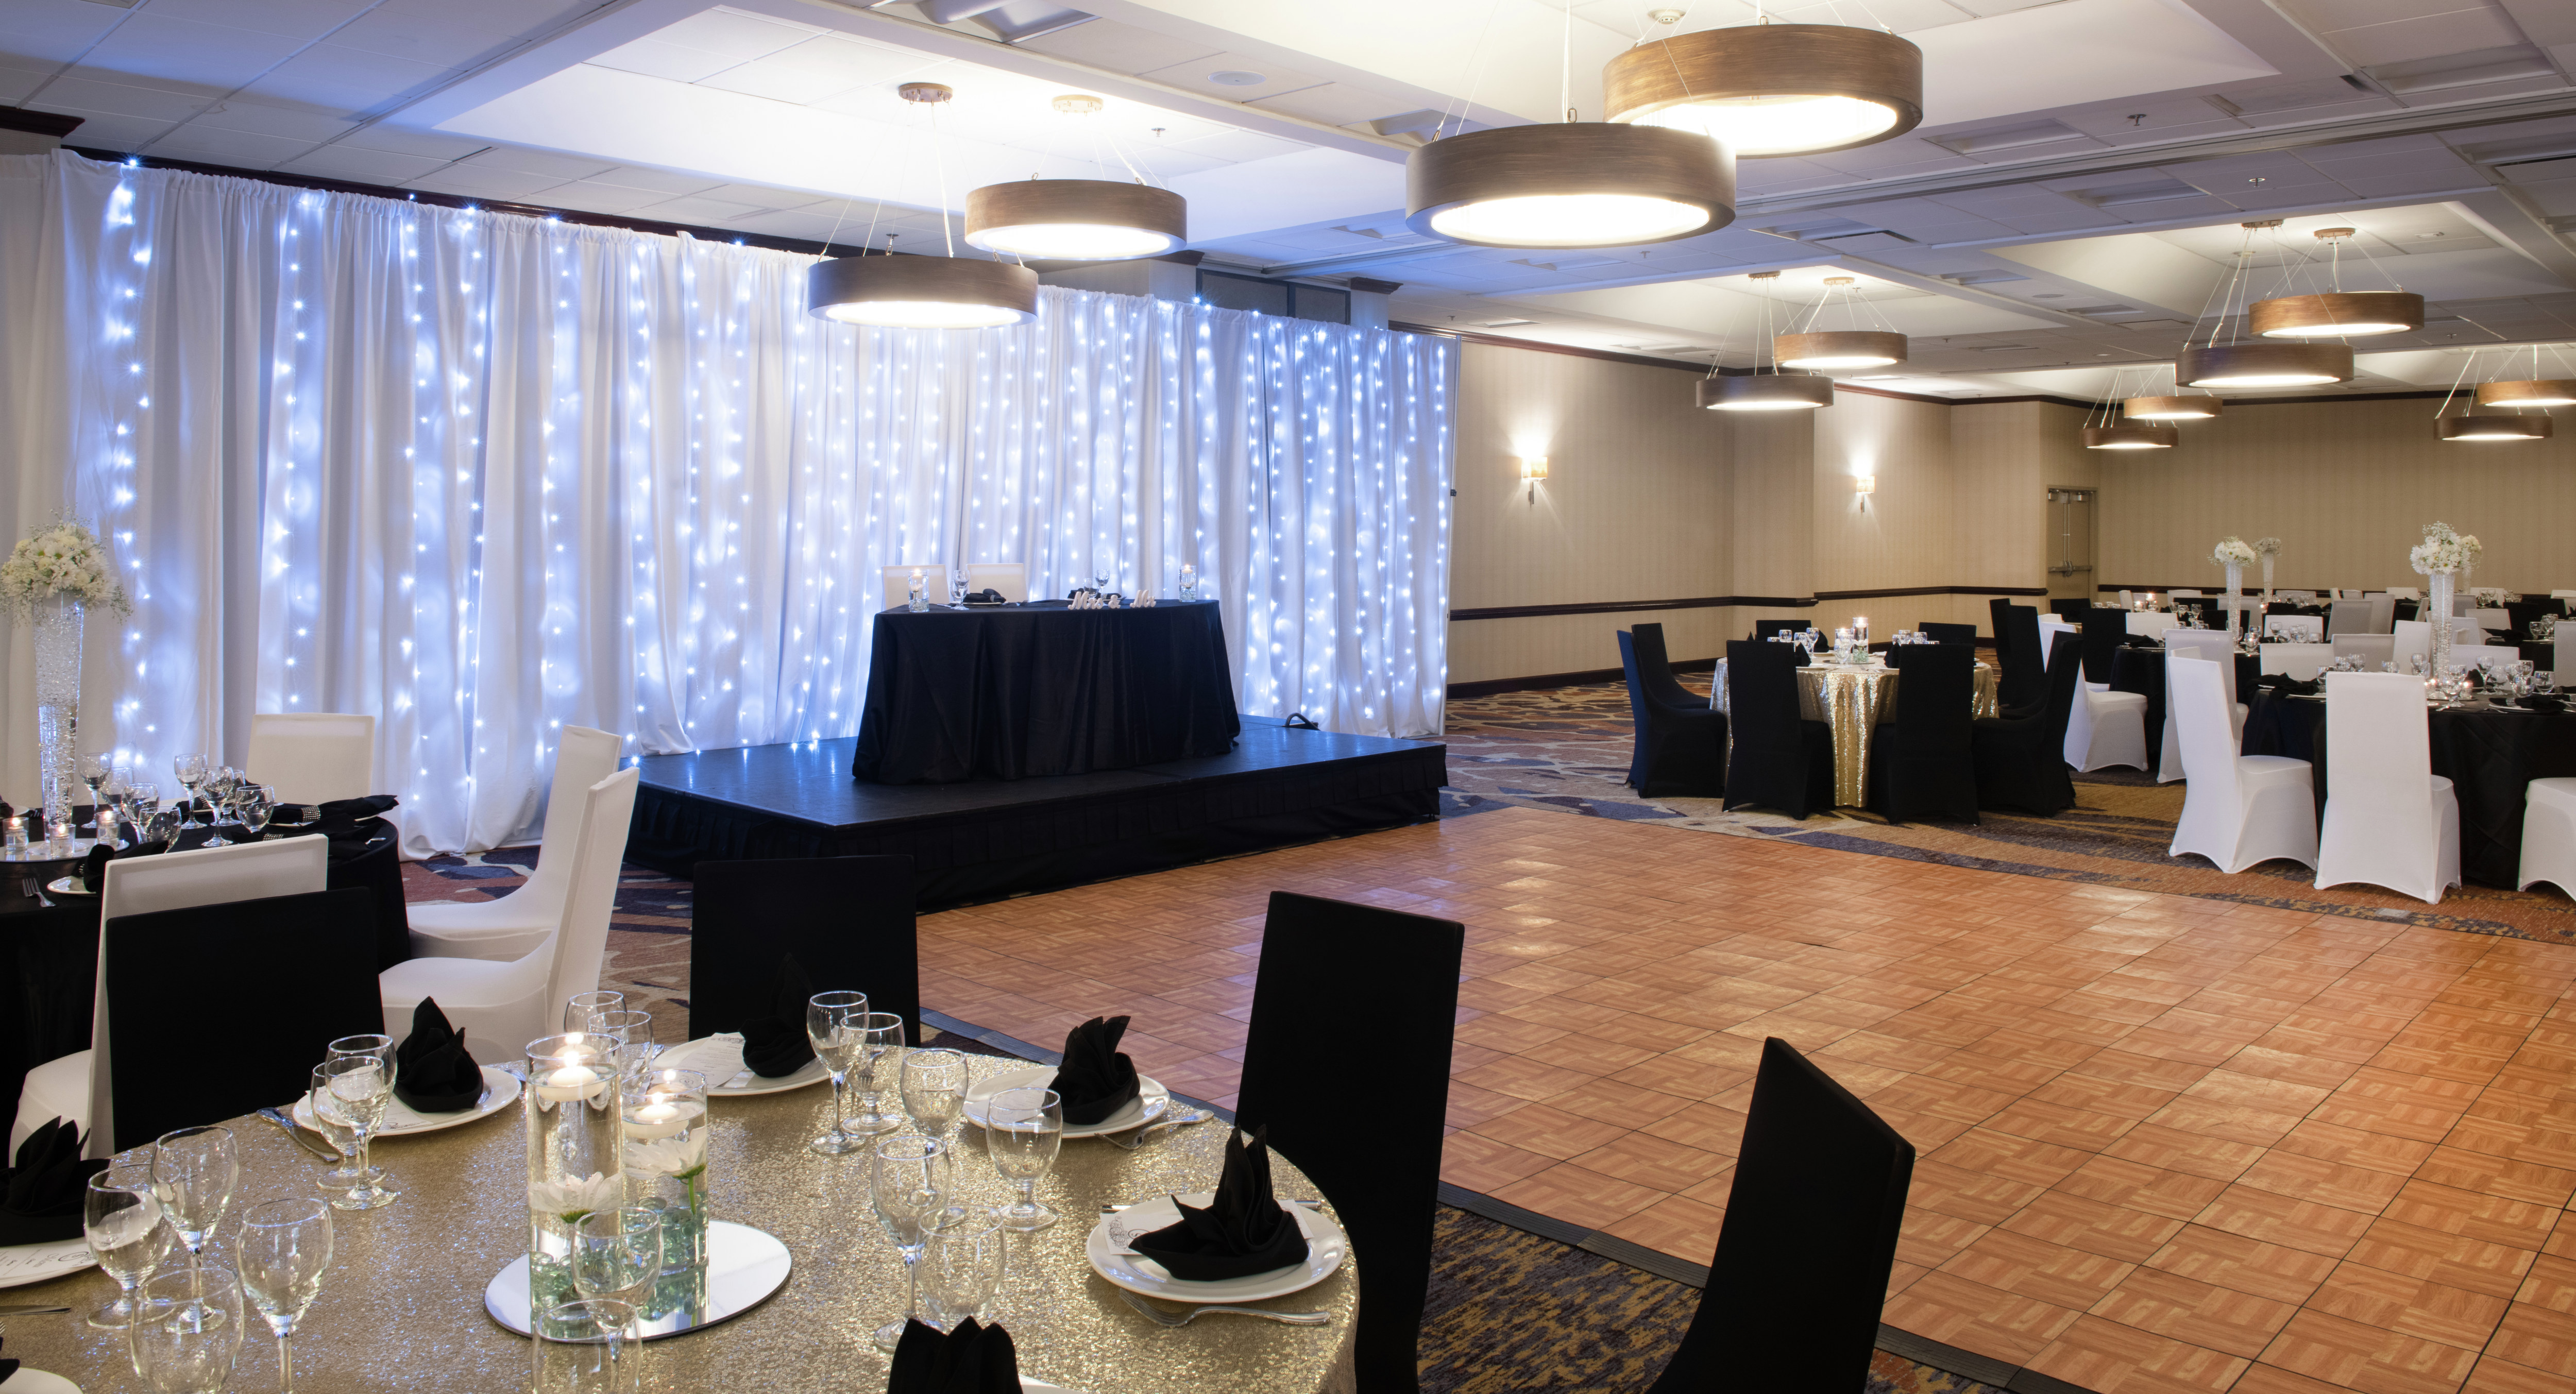 Ballroom setup with round tables in black and white for a banquet